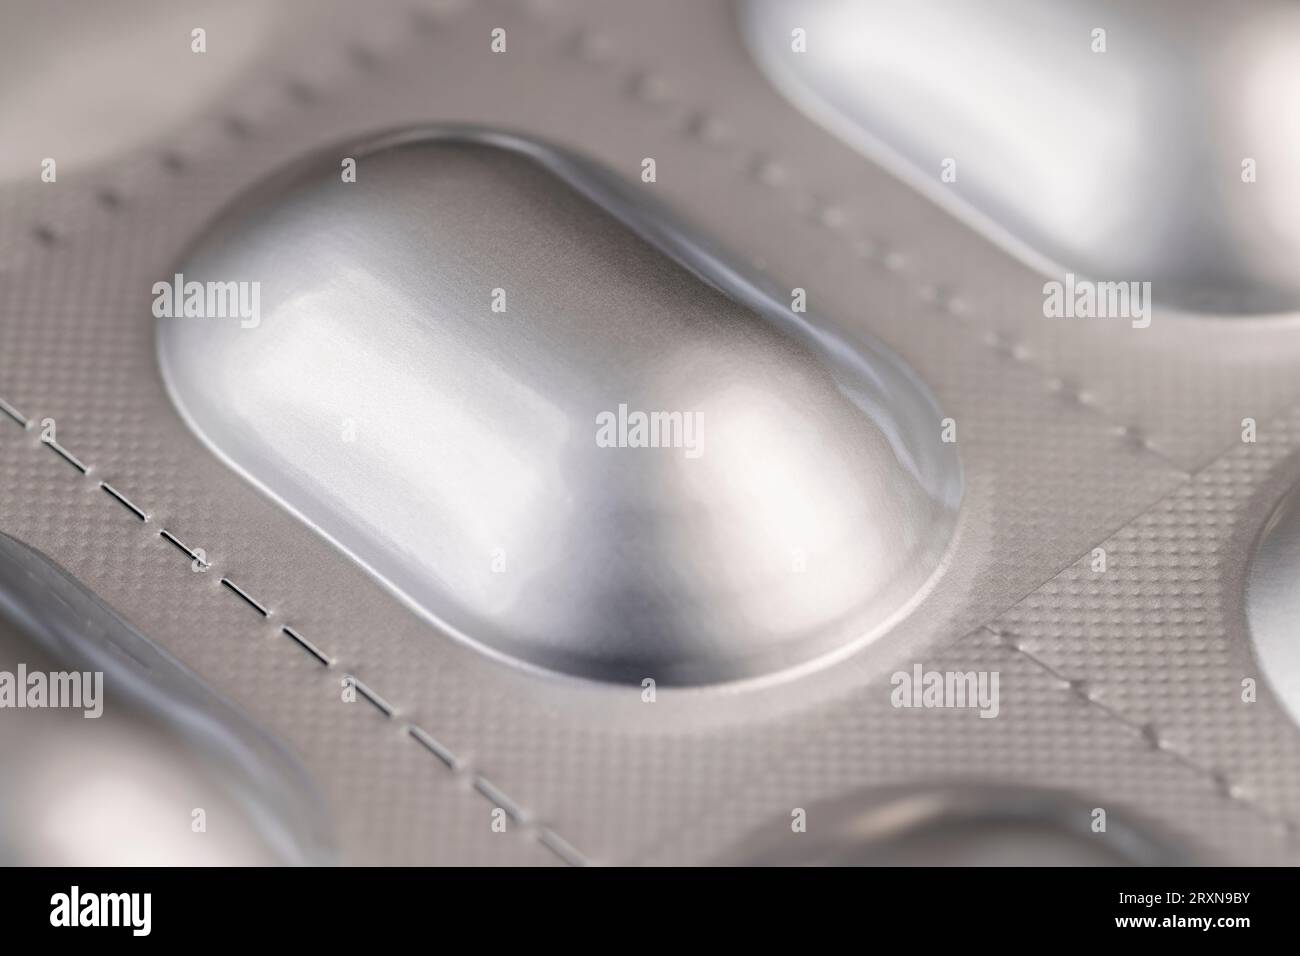 https://c8.alamy.com/comp/2RXN9BY/aluminum-blister-with-medicines-close-up-of-aluminum-foil-packaging-for-medicines-2RXN9BY.jpg